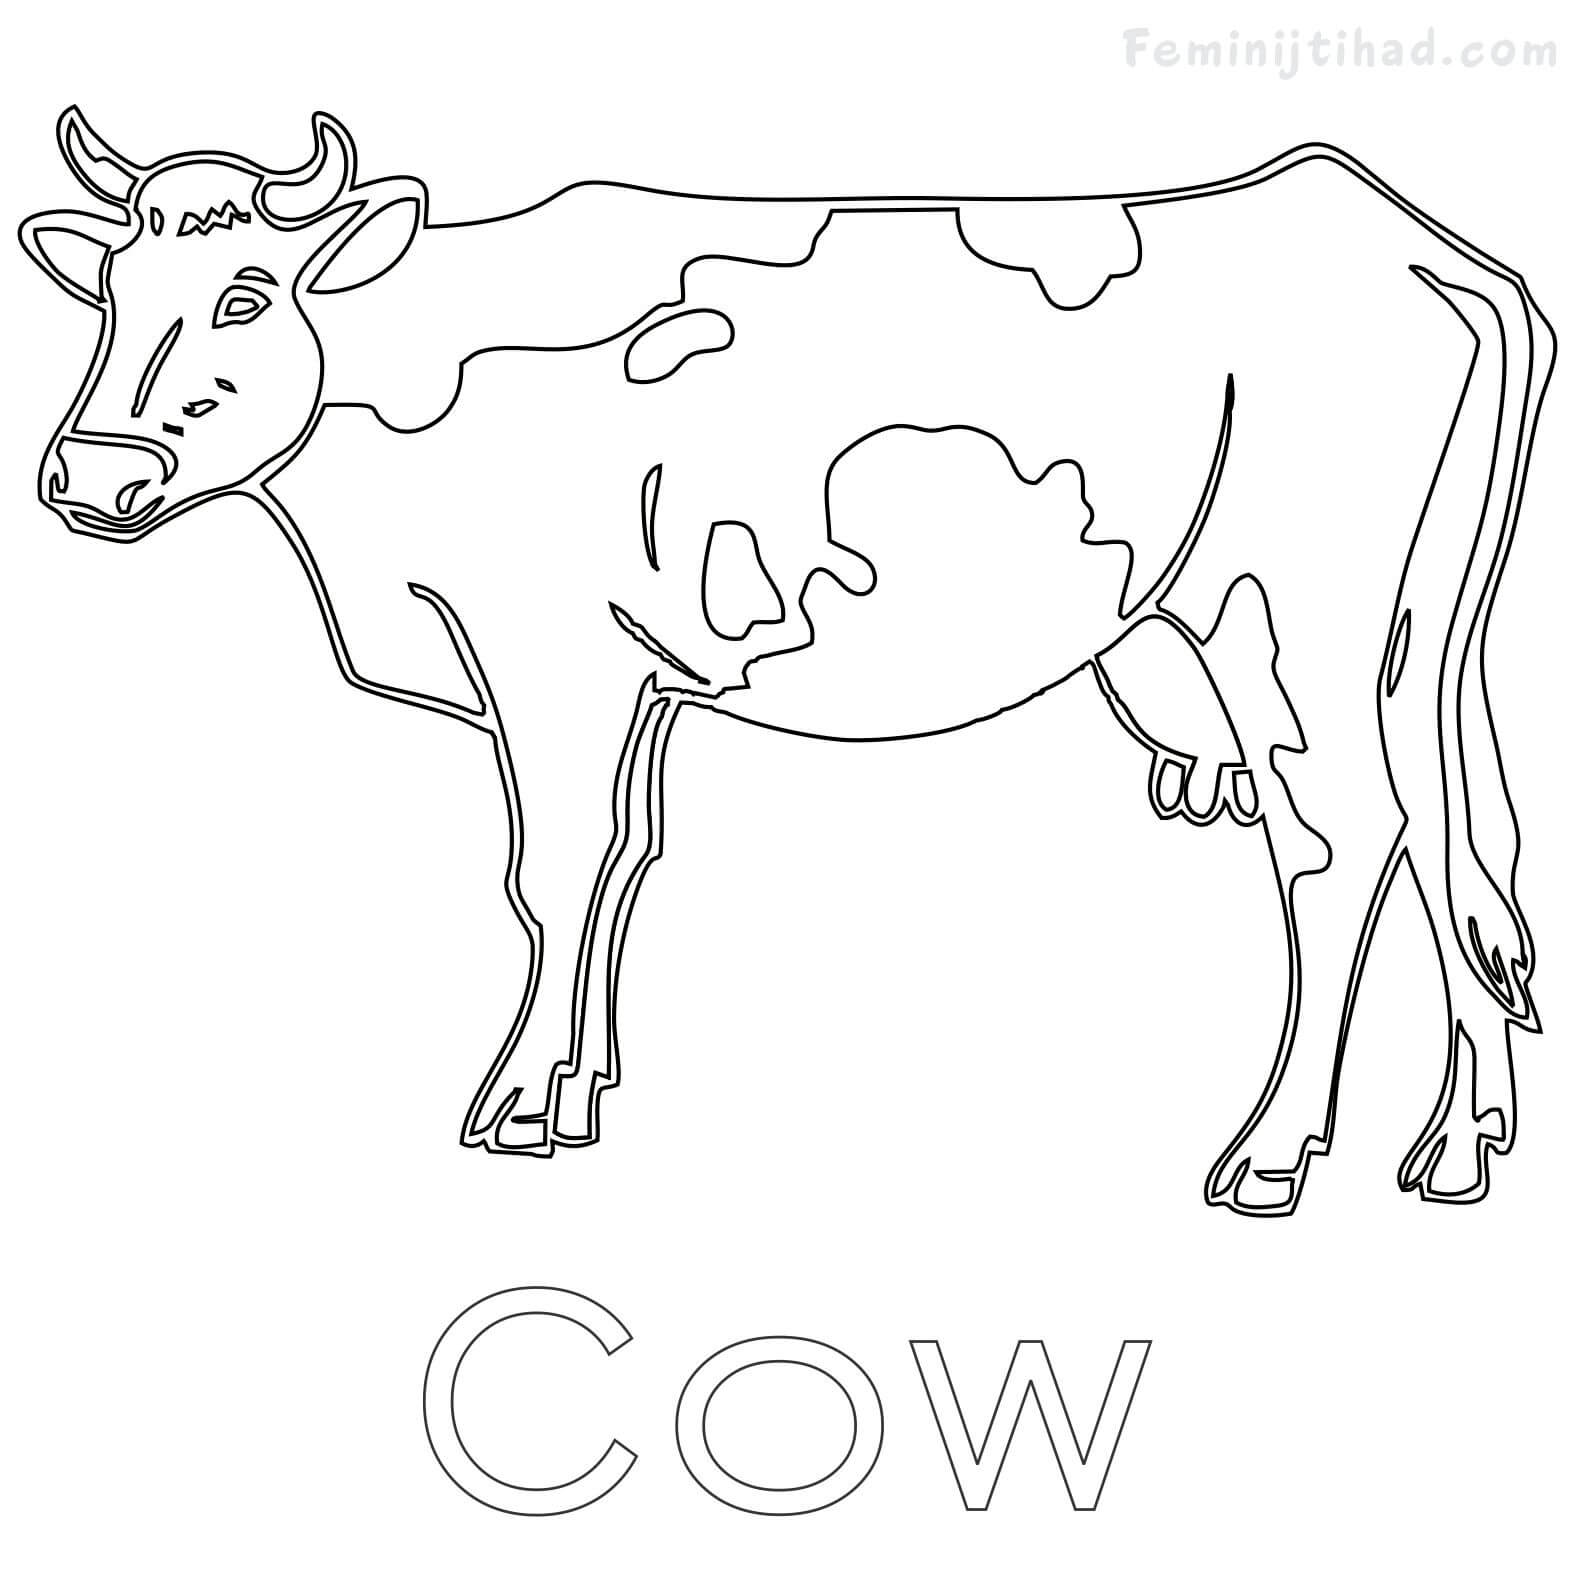 Dairy Cow Coloring Pages at GetColorings.com | Free printable colorings ...